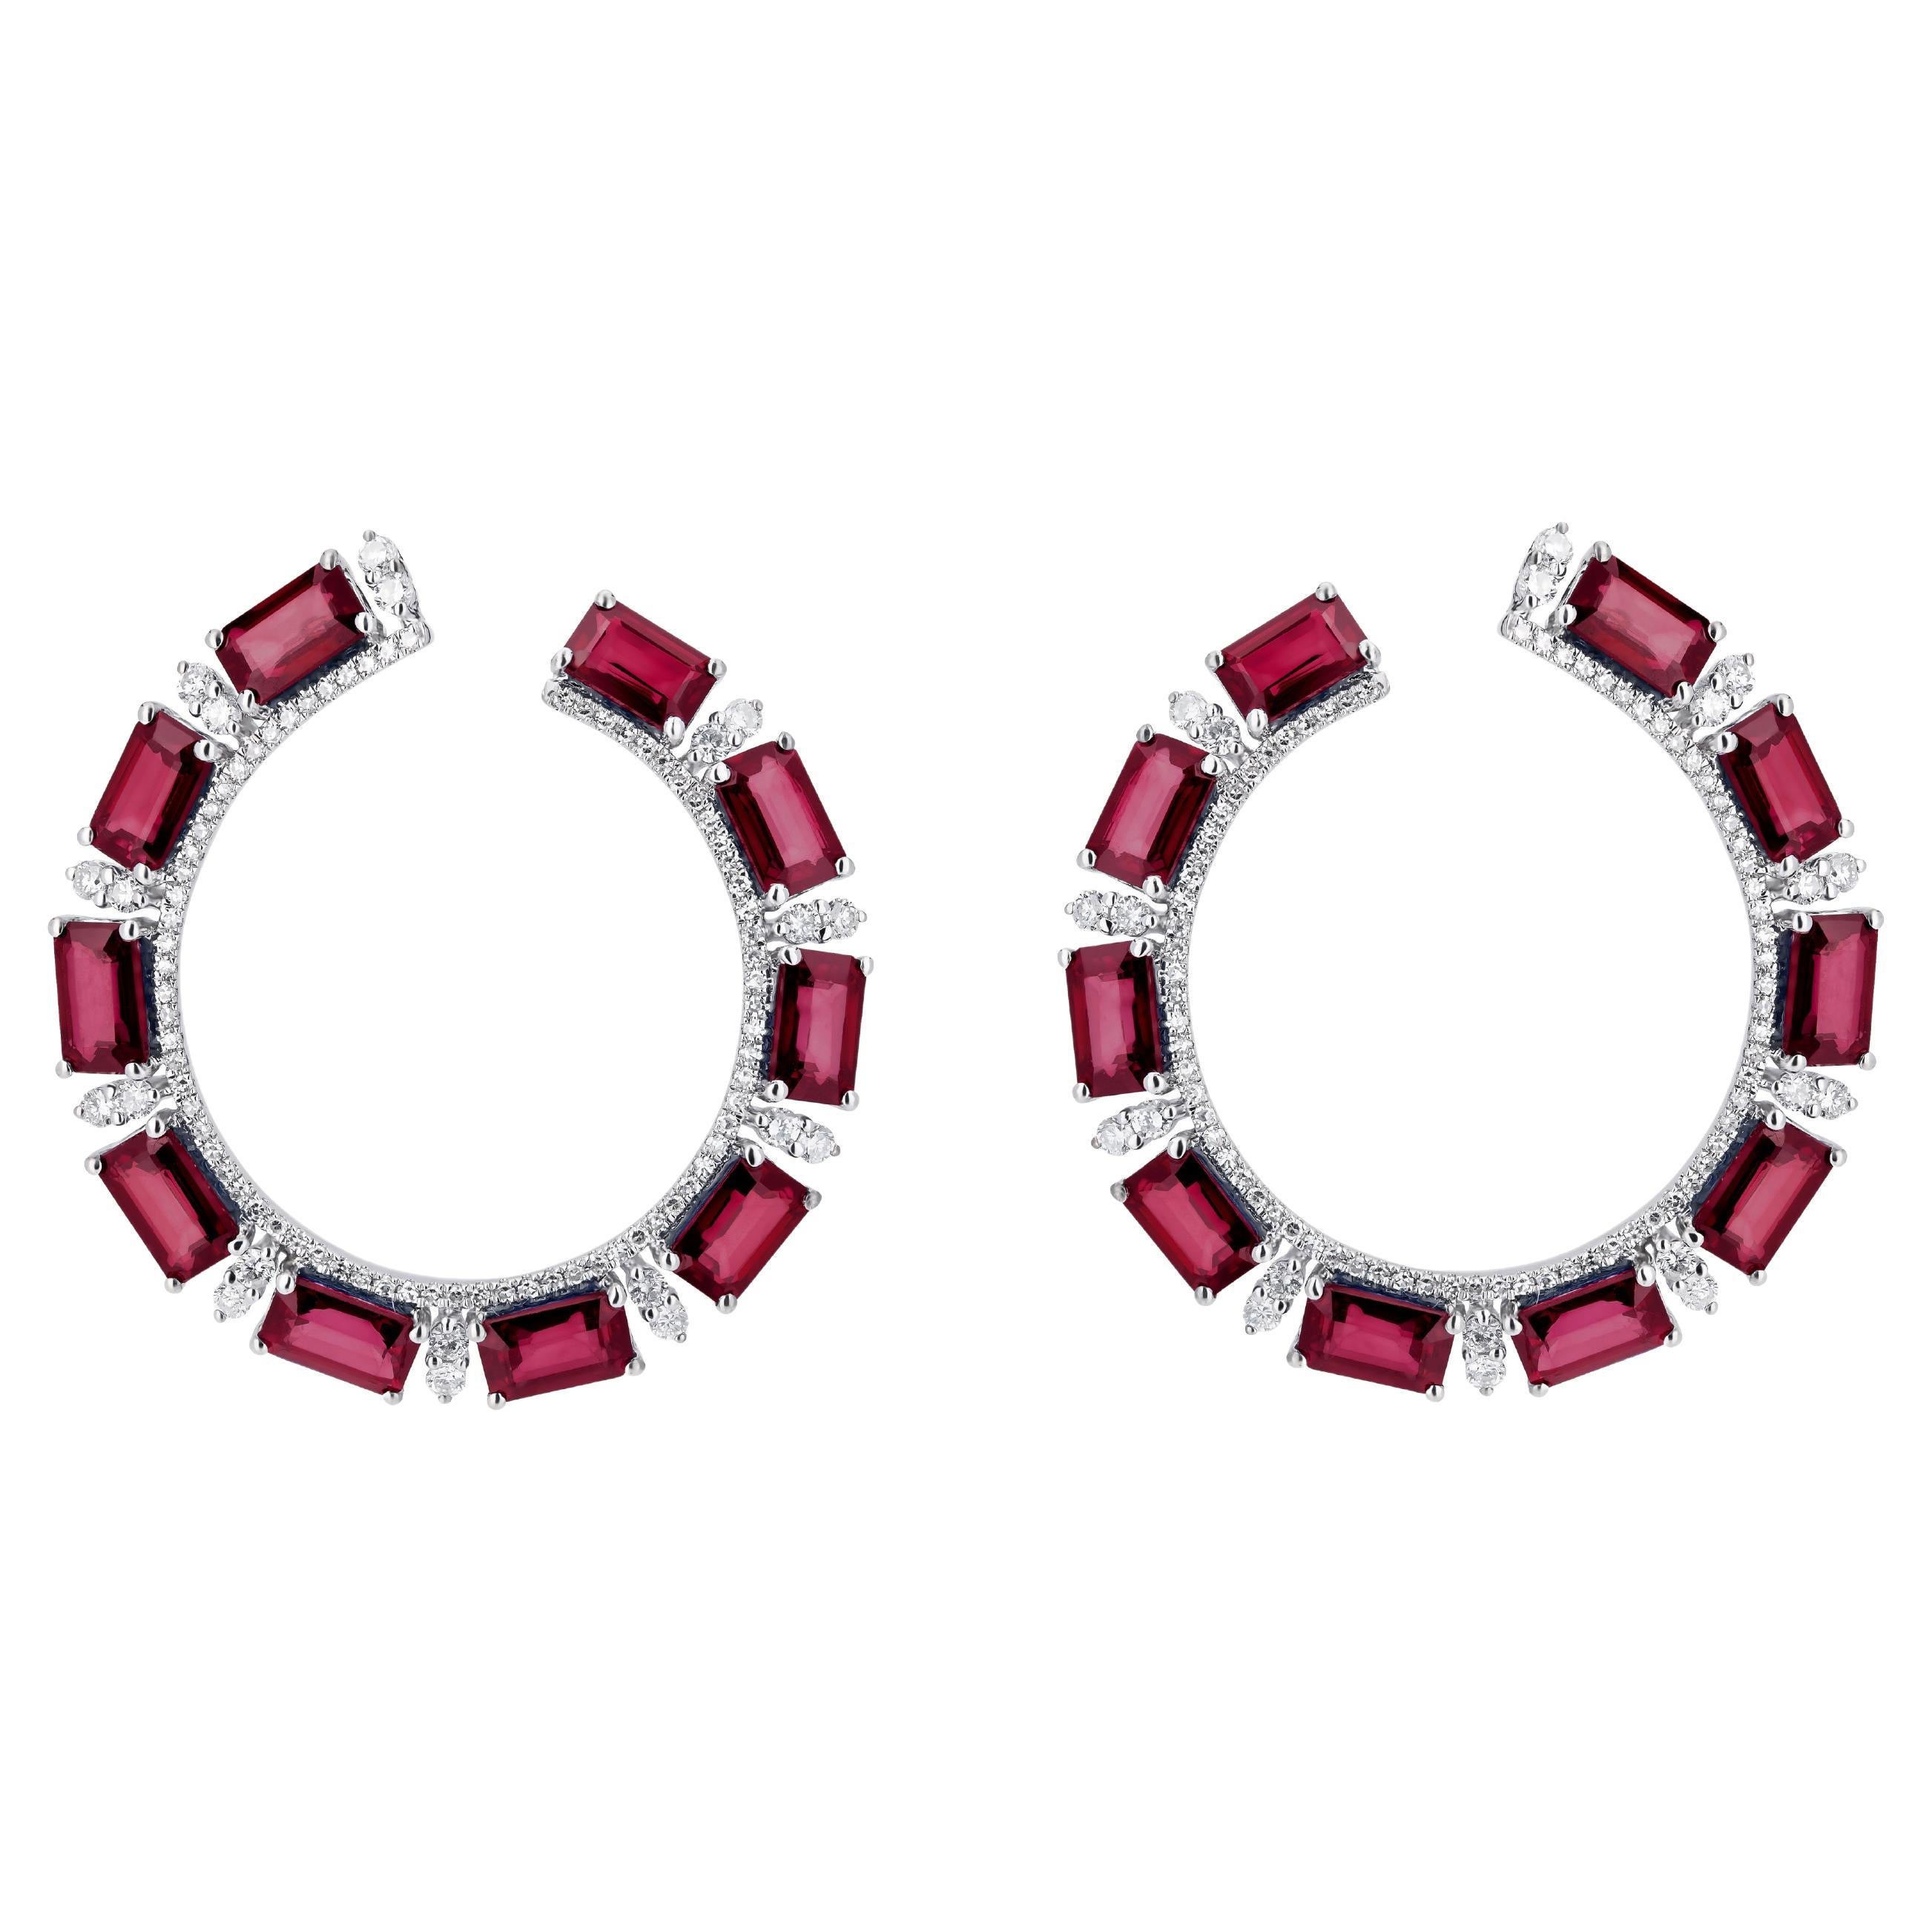 Gemistry 7.15cttw. Octagon Ruby and Diamond Hoop Earrings in 18k White Gold For Sale